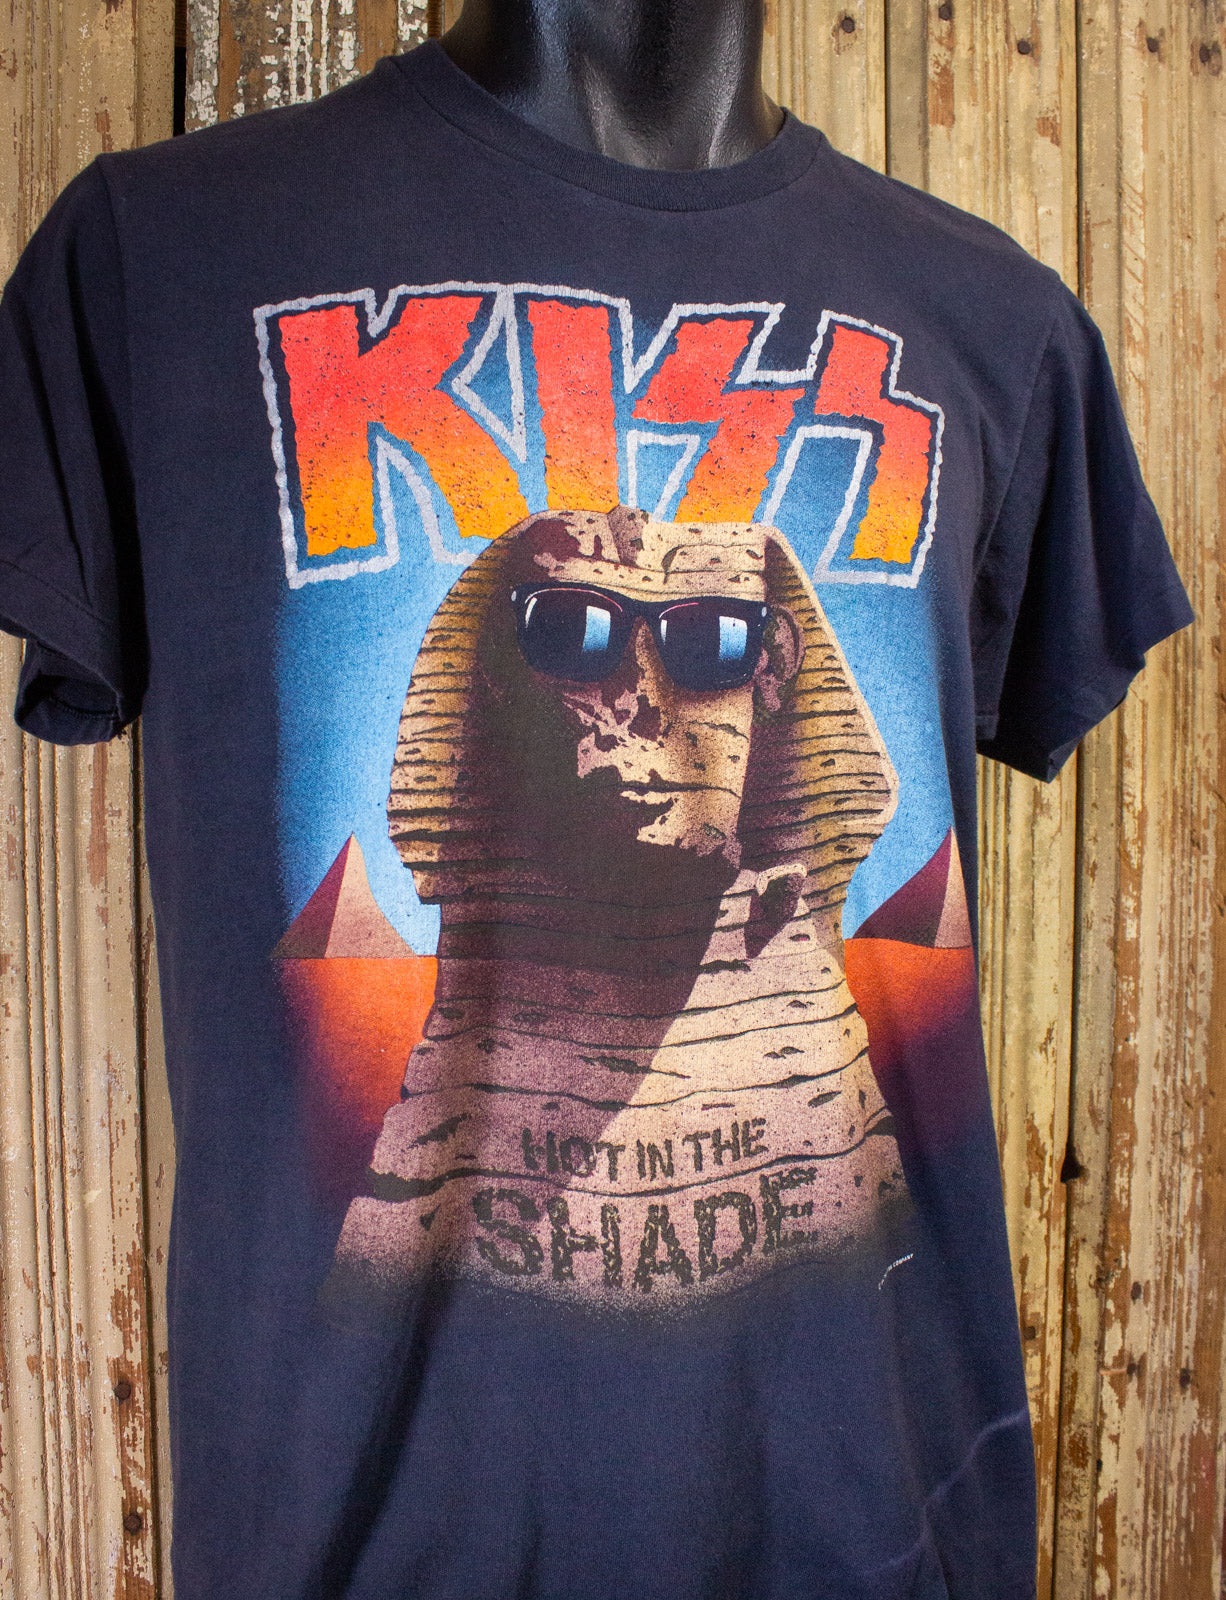 Vintage Kiss Hot In The Shade Concert T Shirt 1990 Black Large